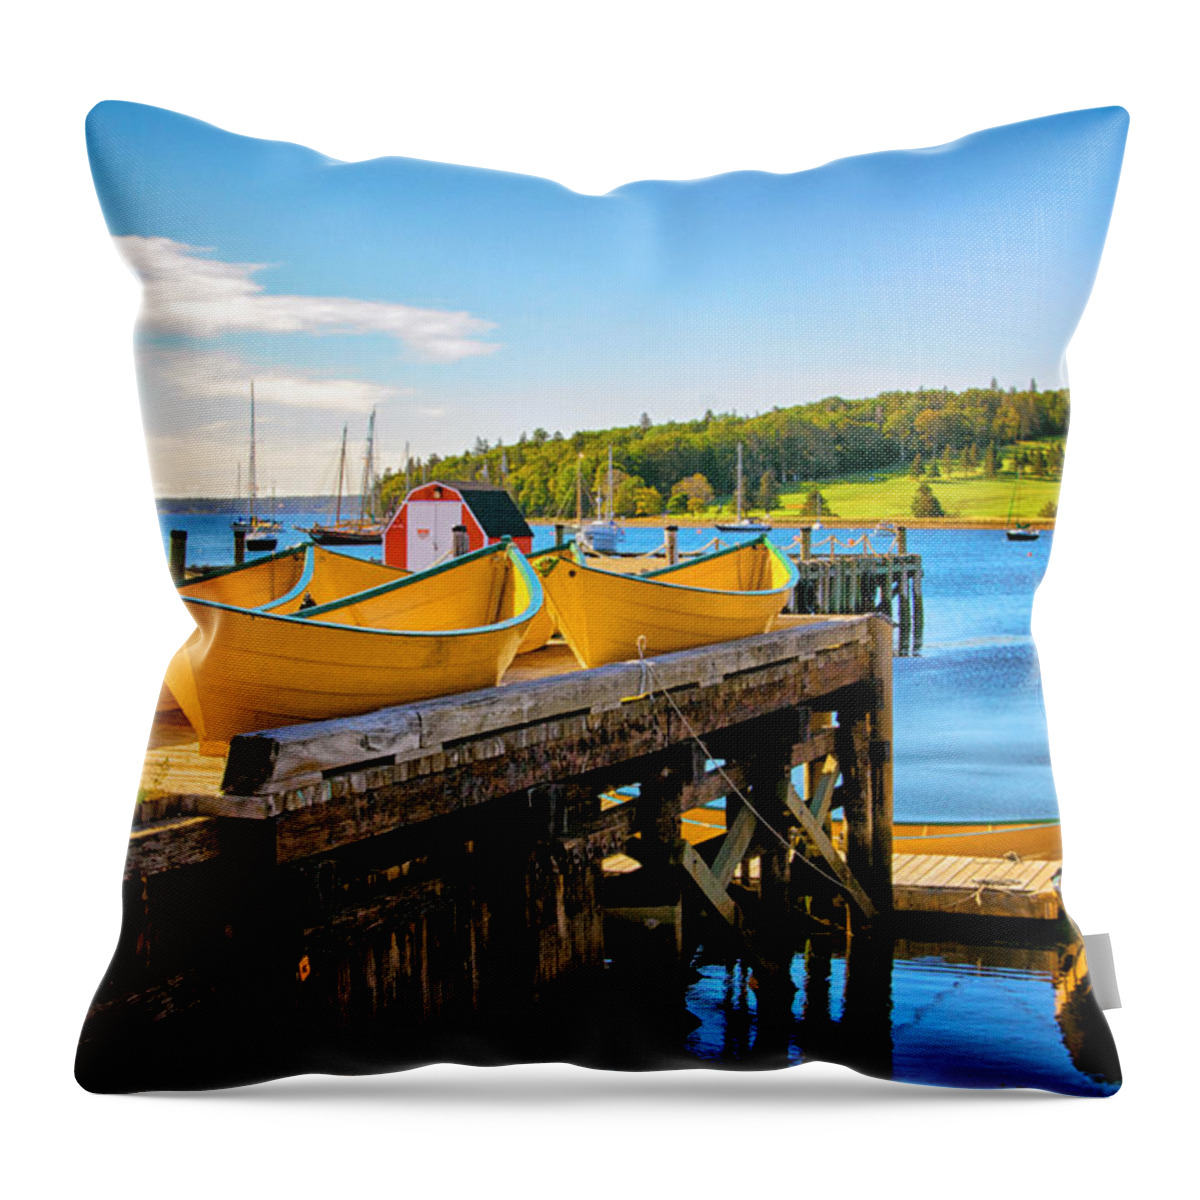 Dories On The Dock Throw Pillow featuring the photograph Dories on the Dock by Carolyn Derstine